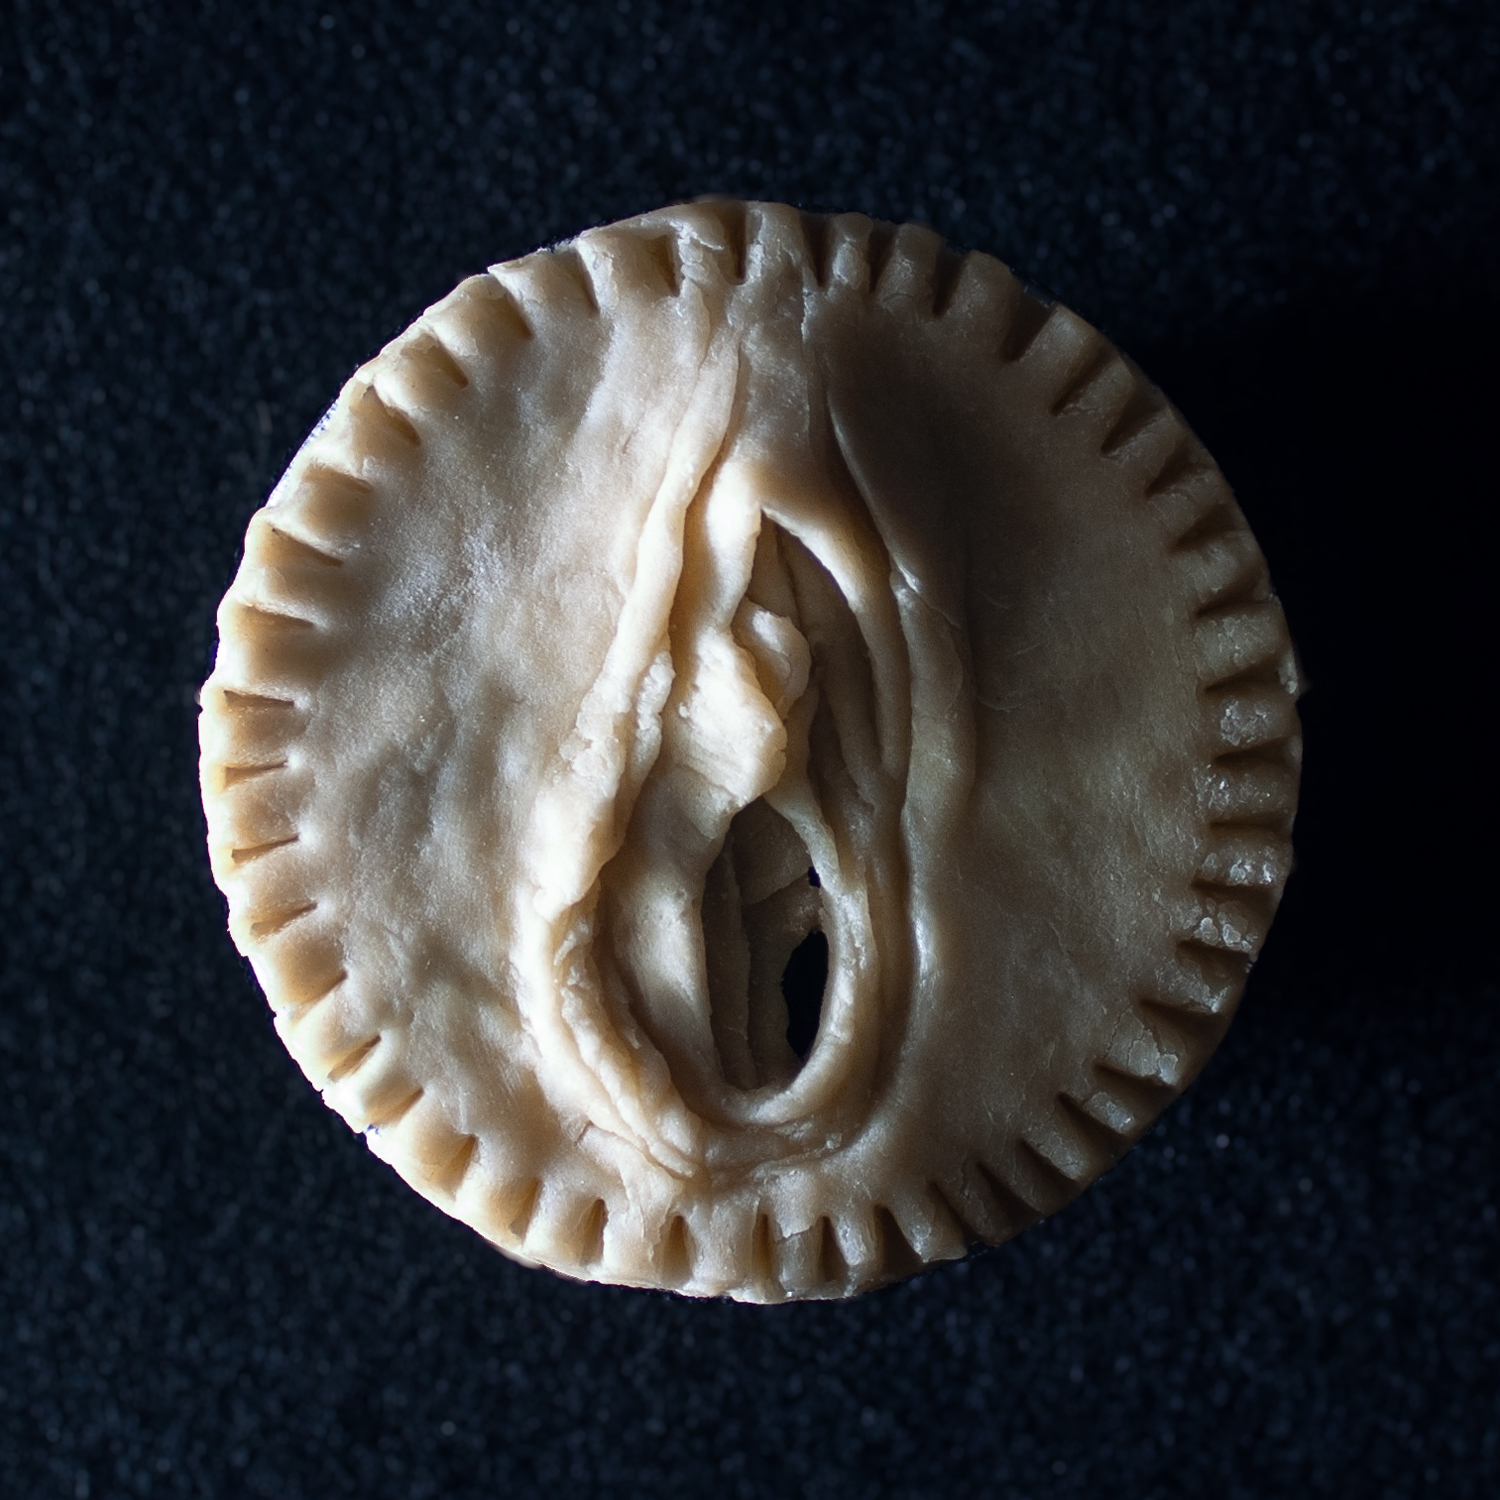 Pie 7, a pie sculpted to appear like a vulva